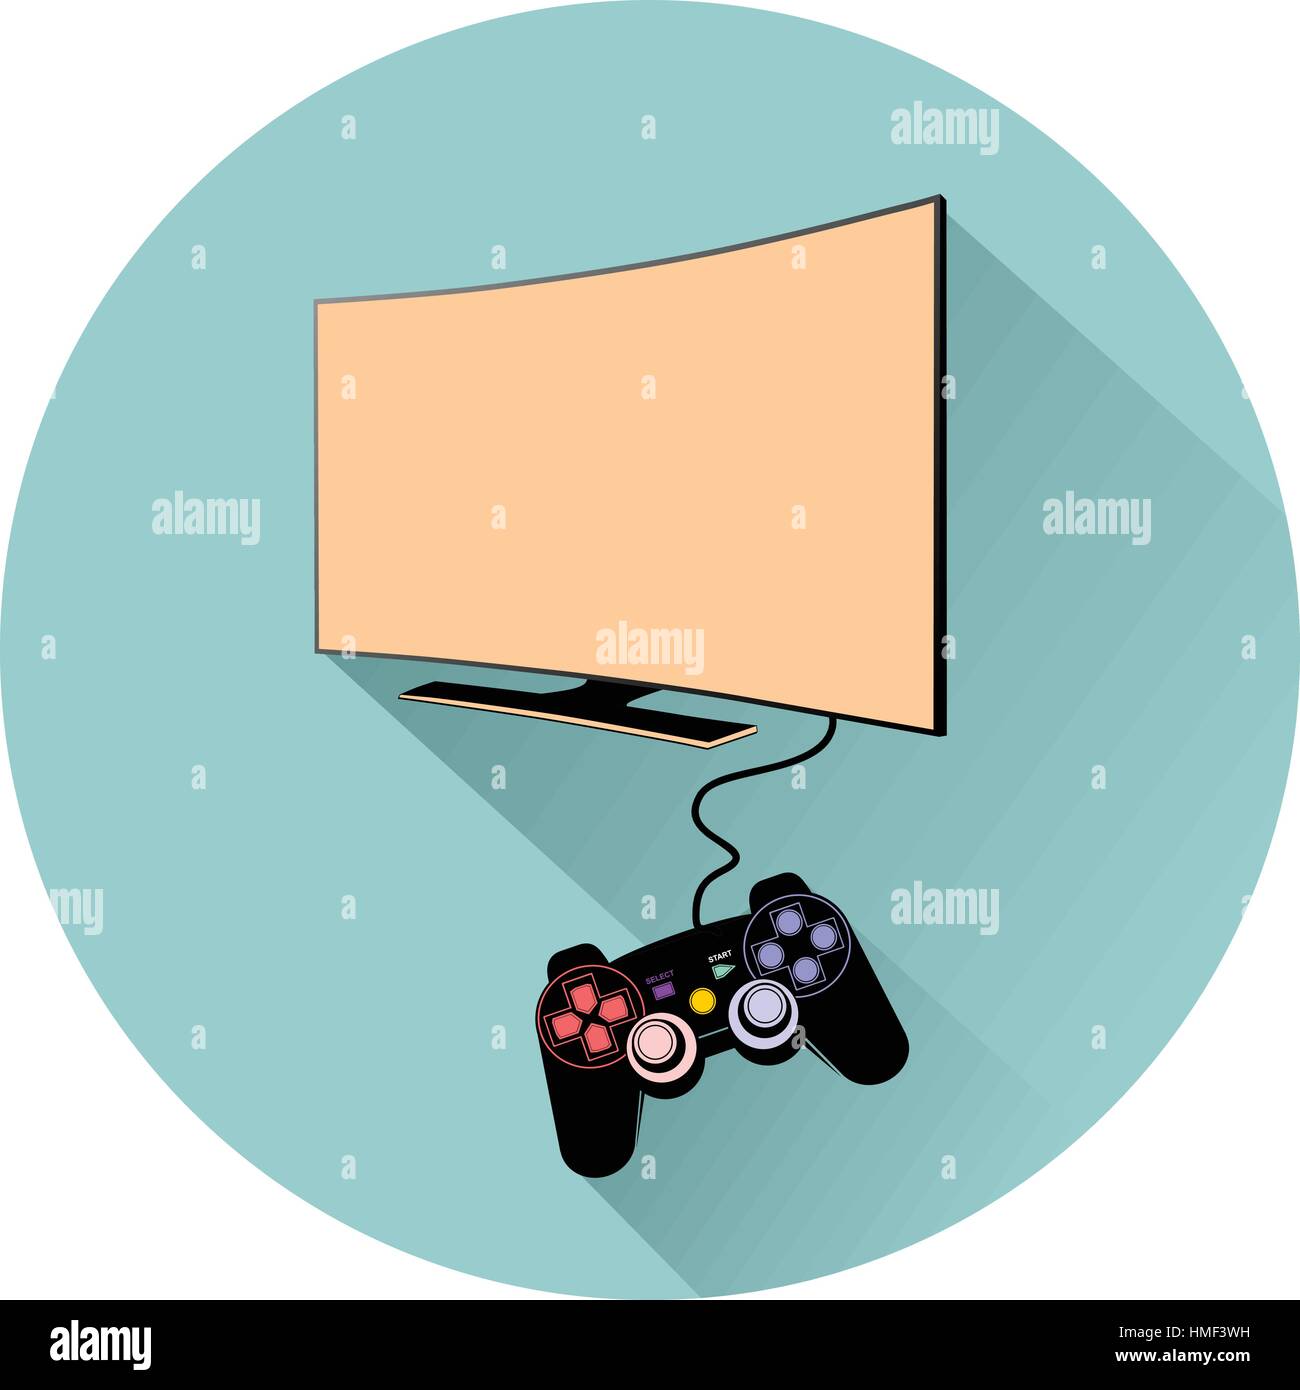 Sony Playstation 4 with TV Stock Vector